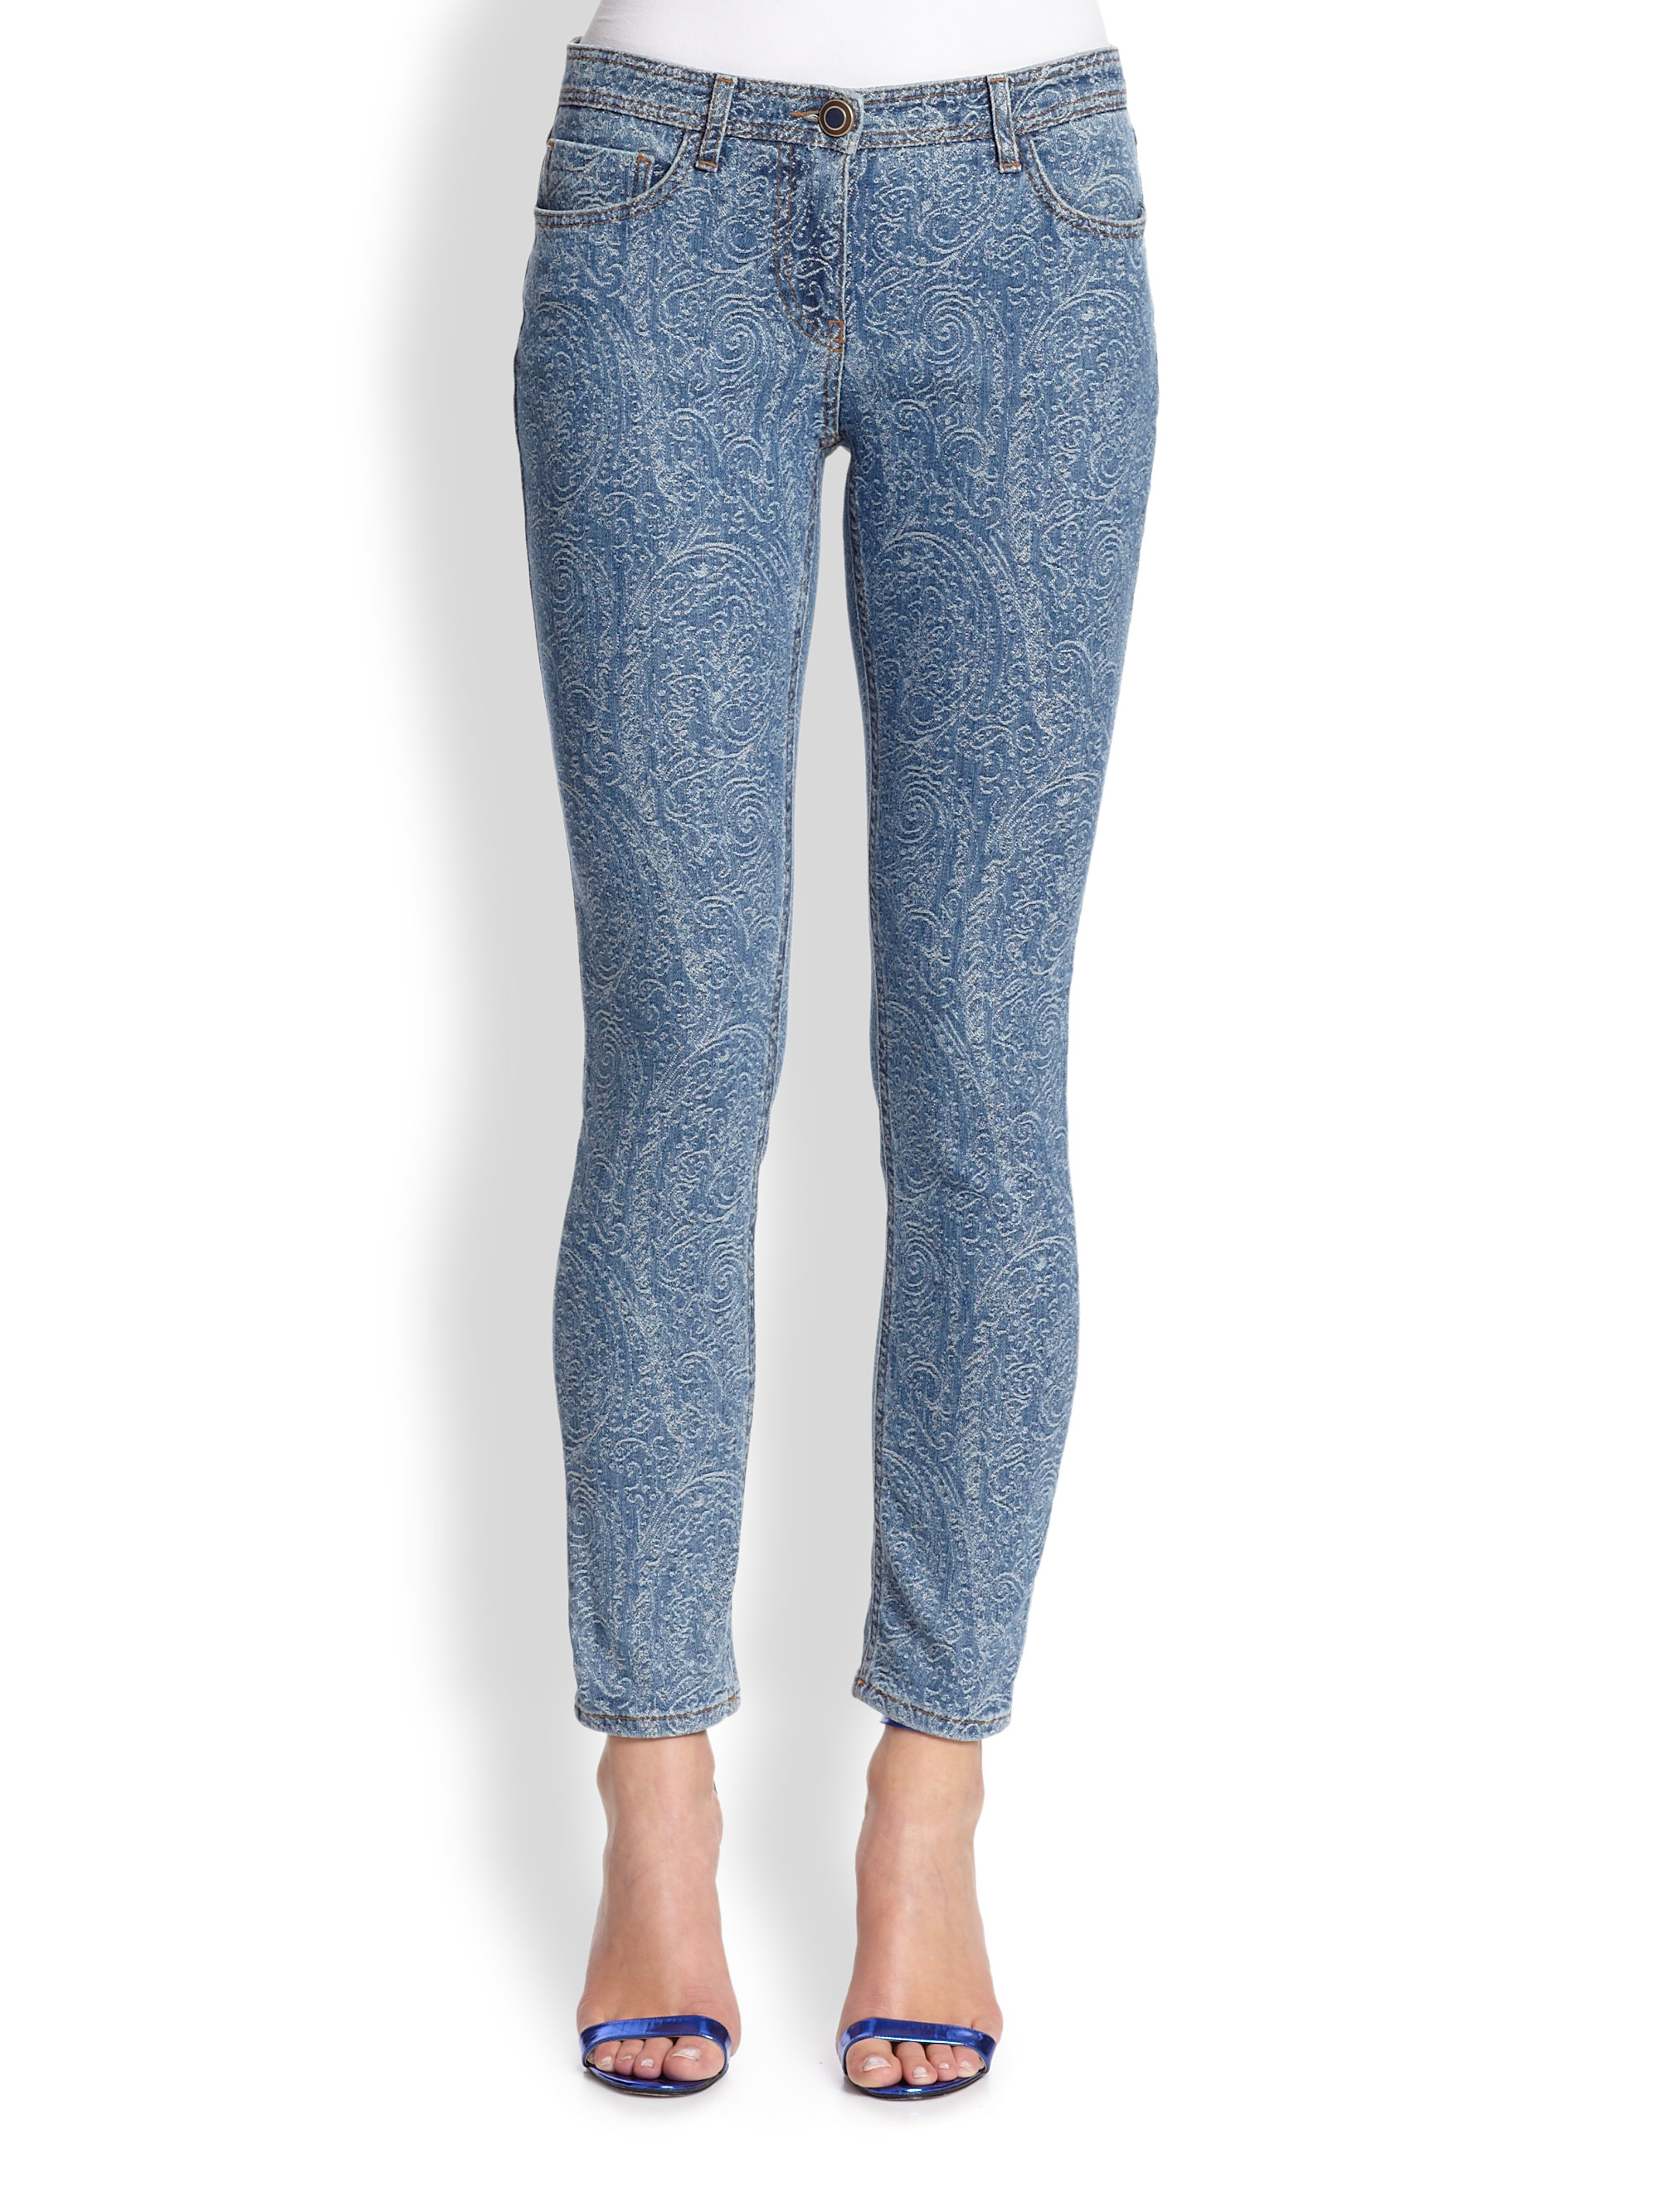 Lyst - Etro Paisley-print Skinny Jeans in Blue